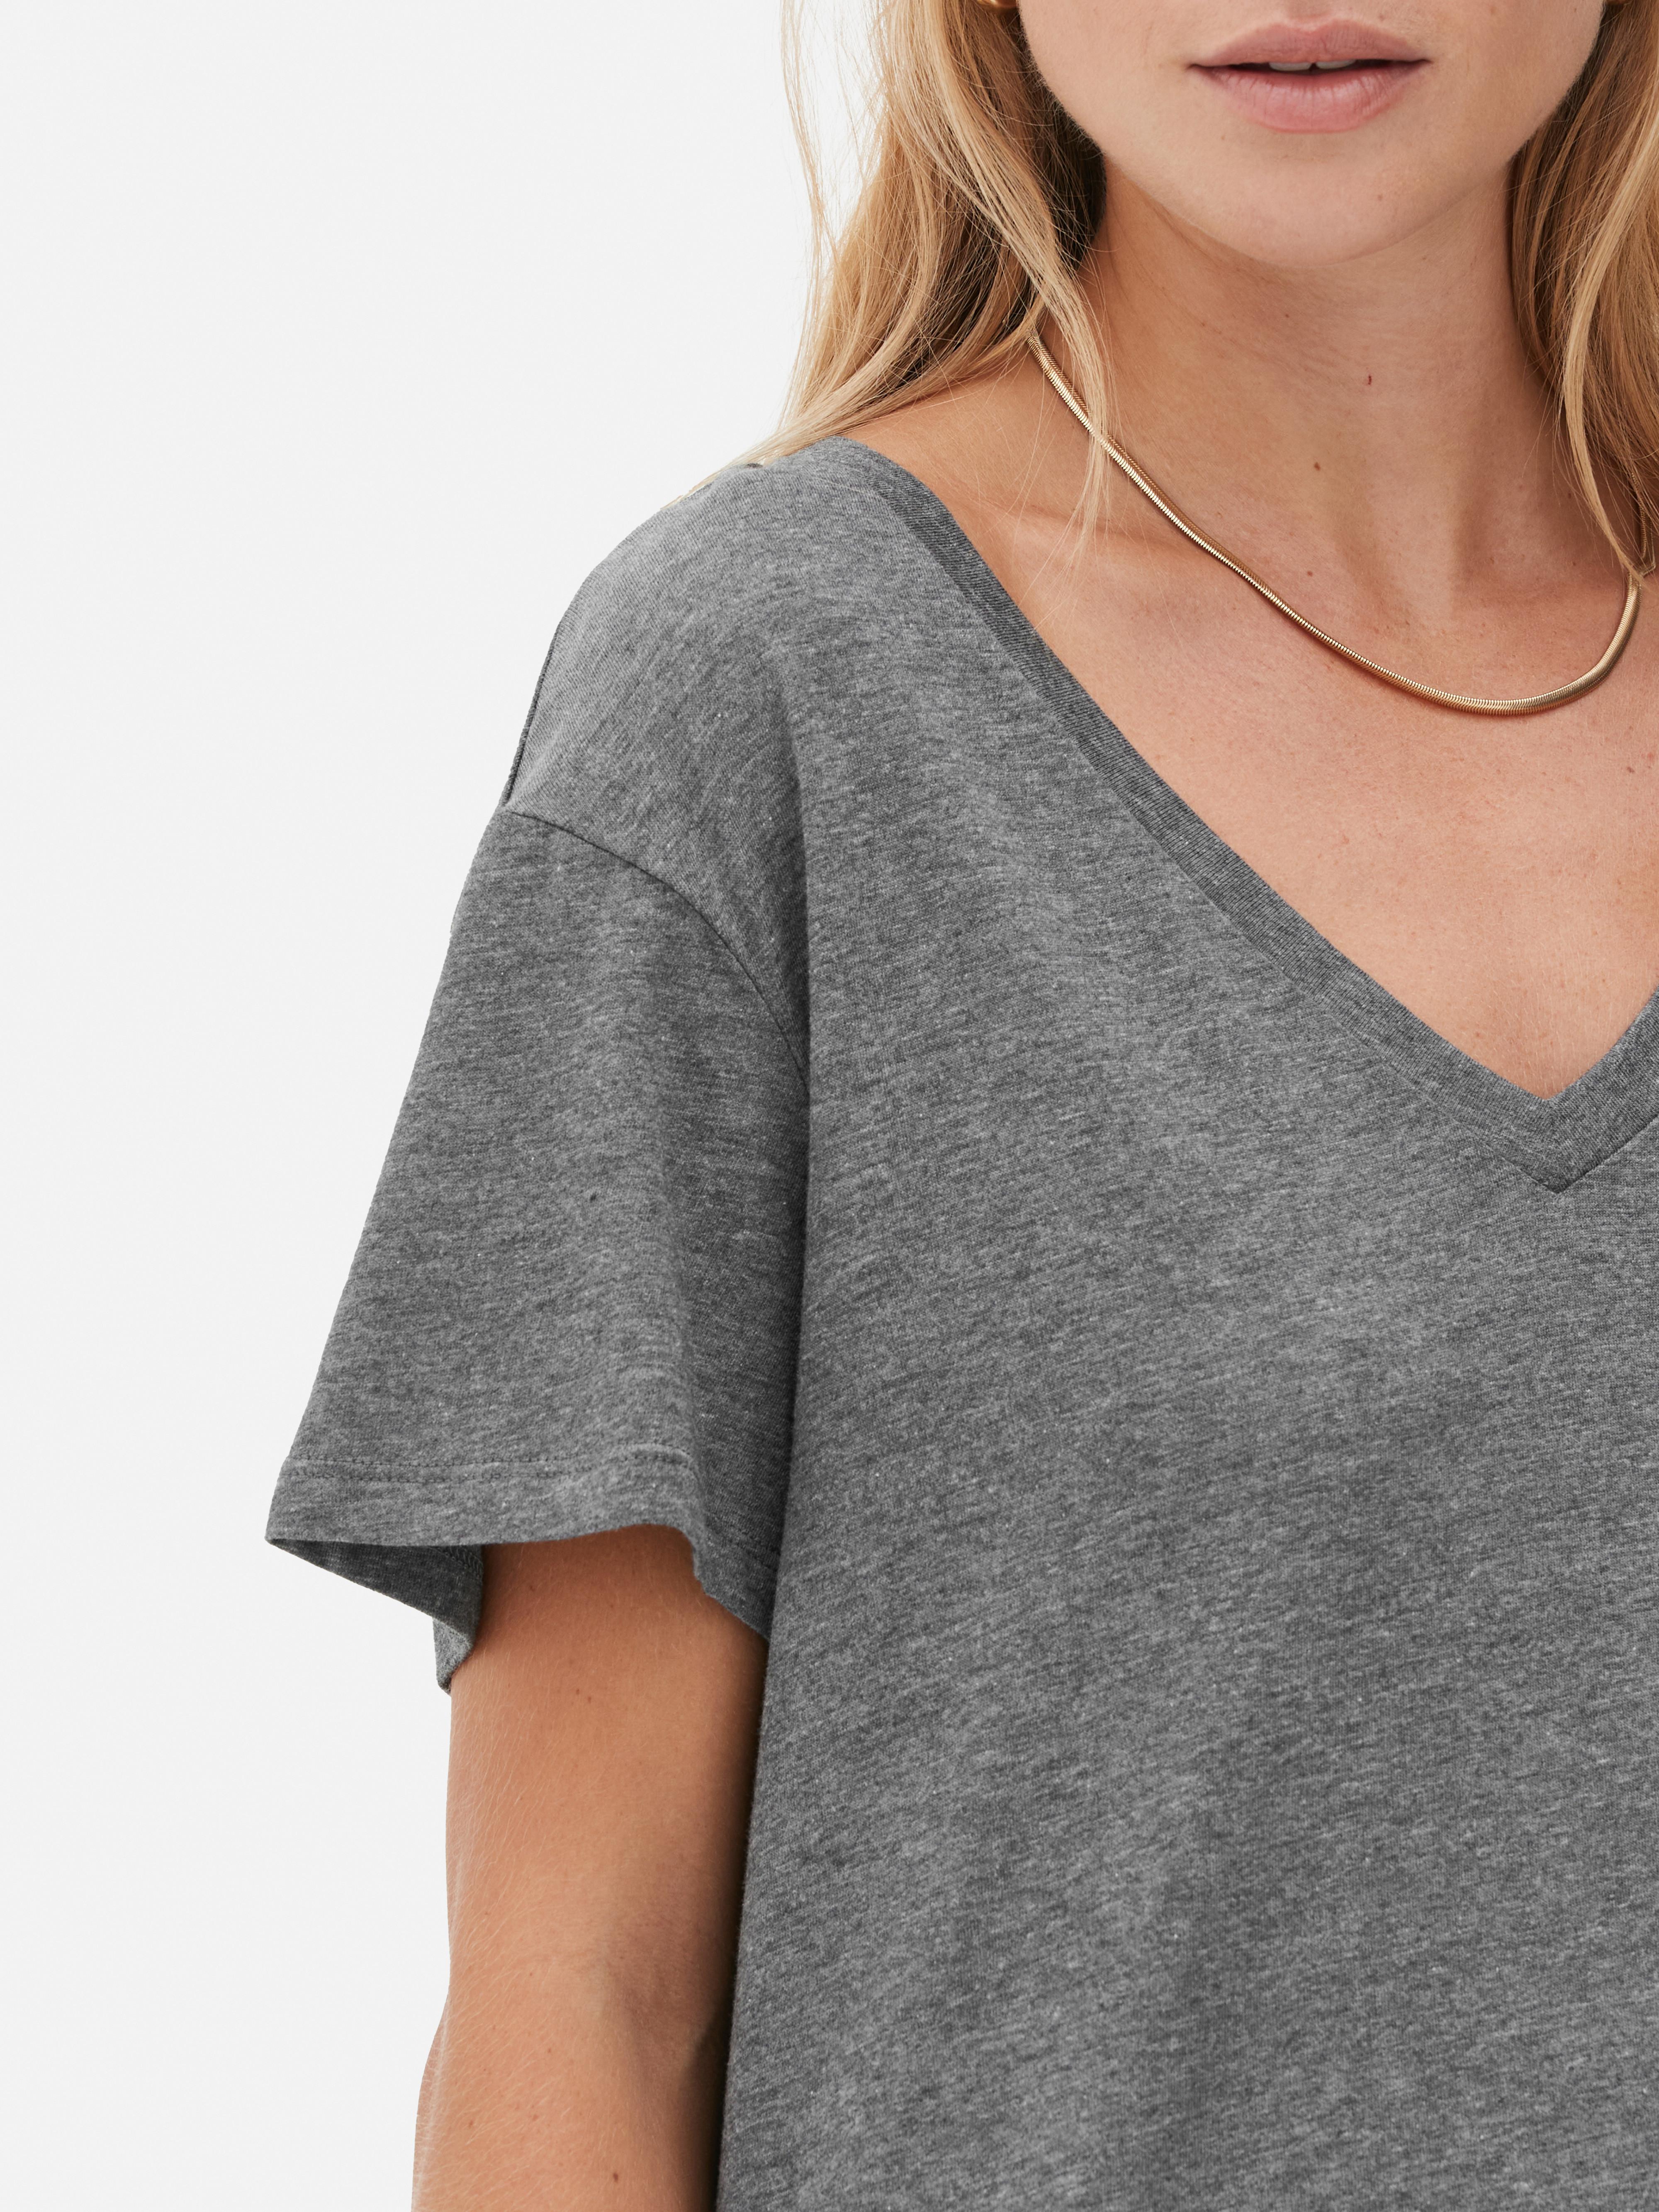 Primark Shop Online Women's Casual Tops Crew Neck Stripes Colour Block T- Shirts Loose Fit Pullover Silver Top, gray, M : : Fashion